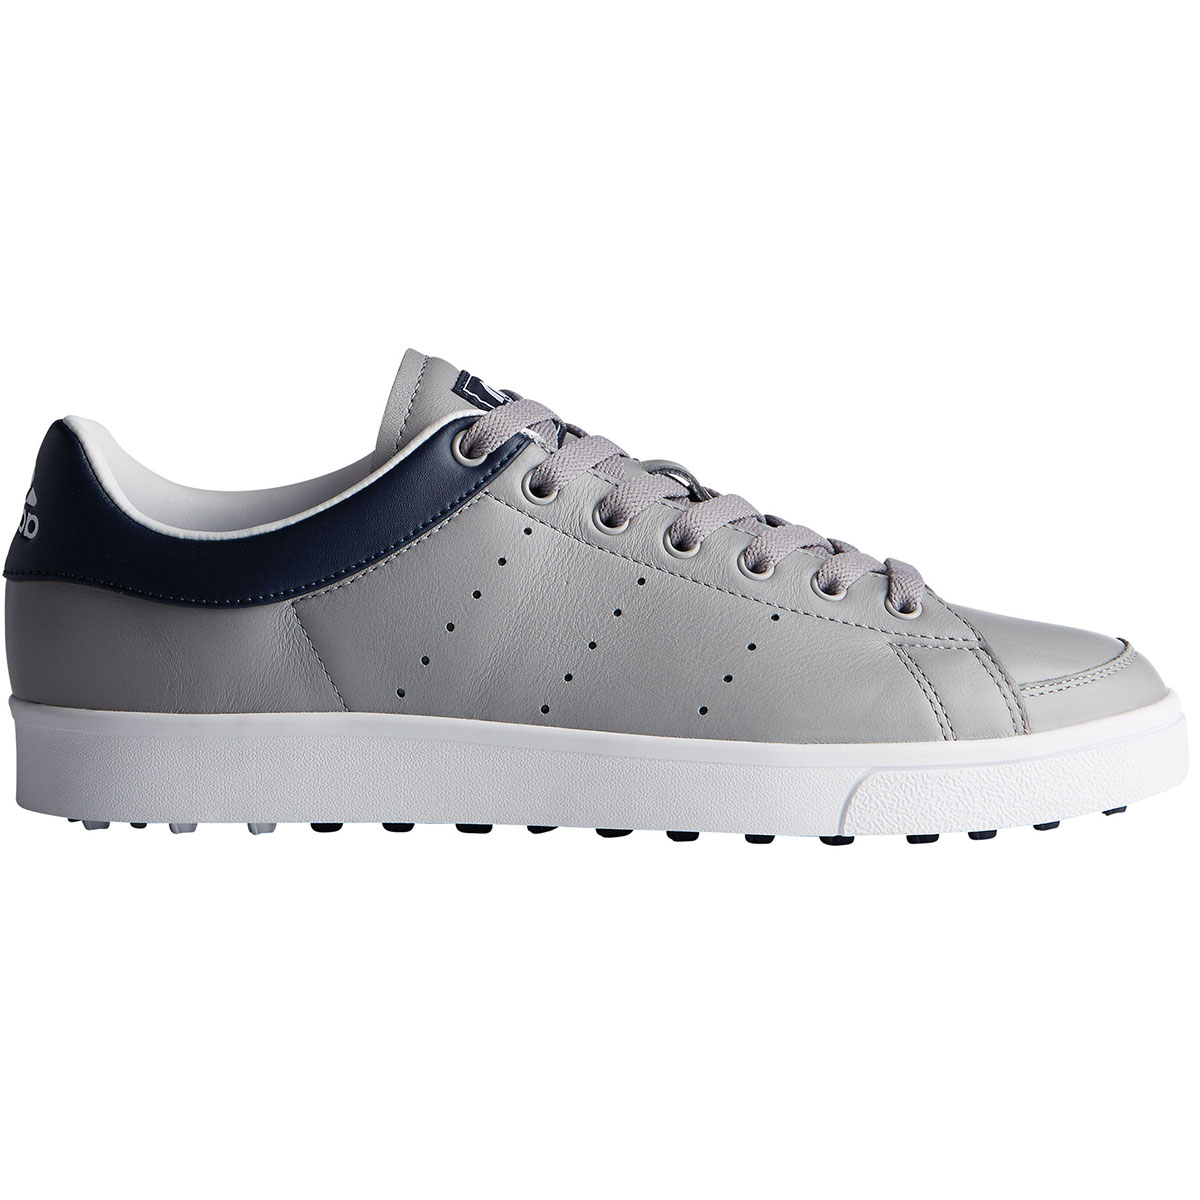 adidas leather golf shoes